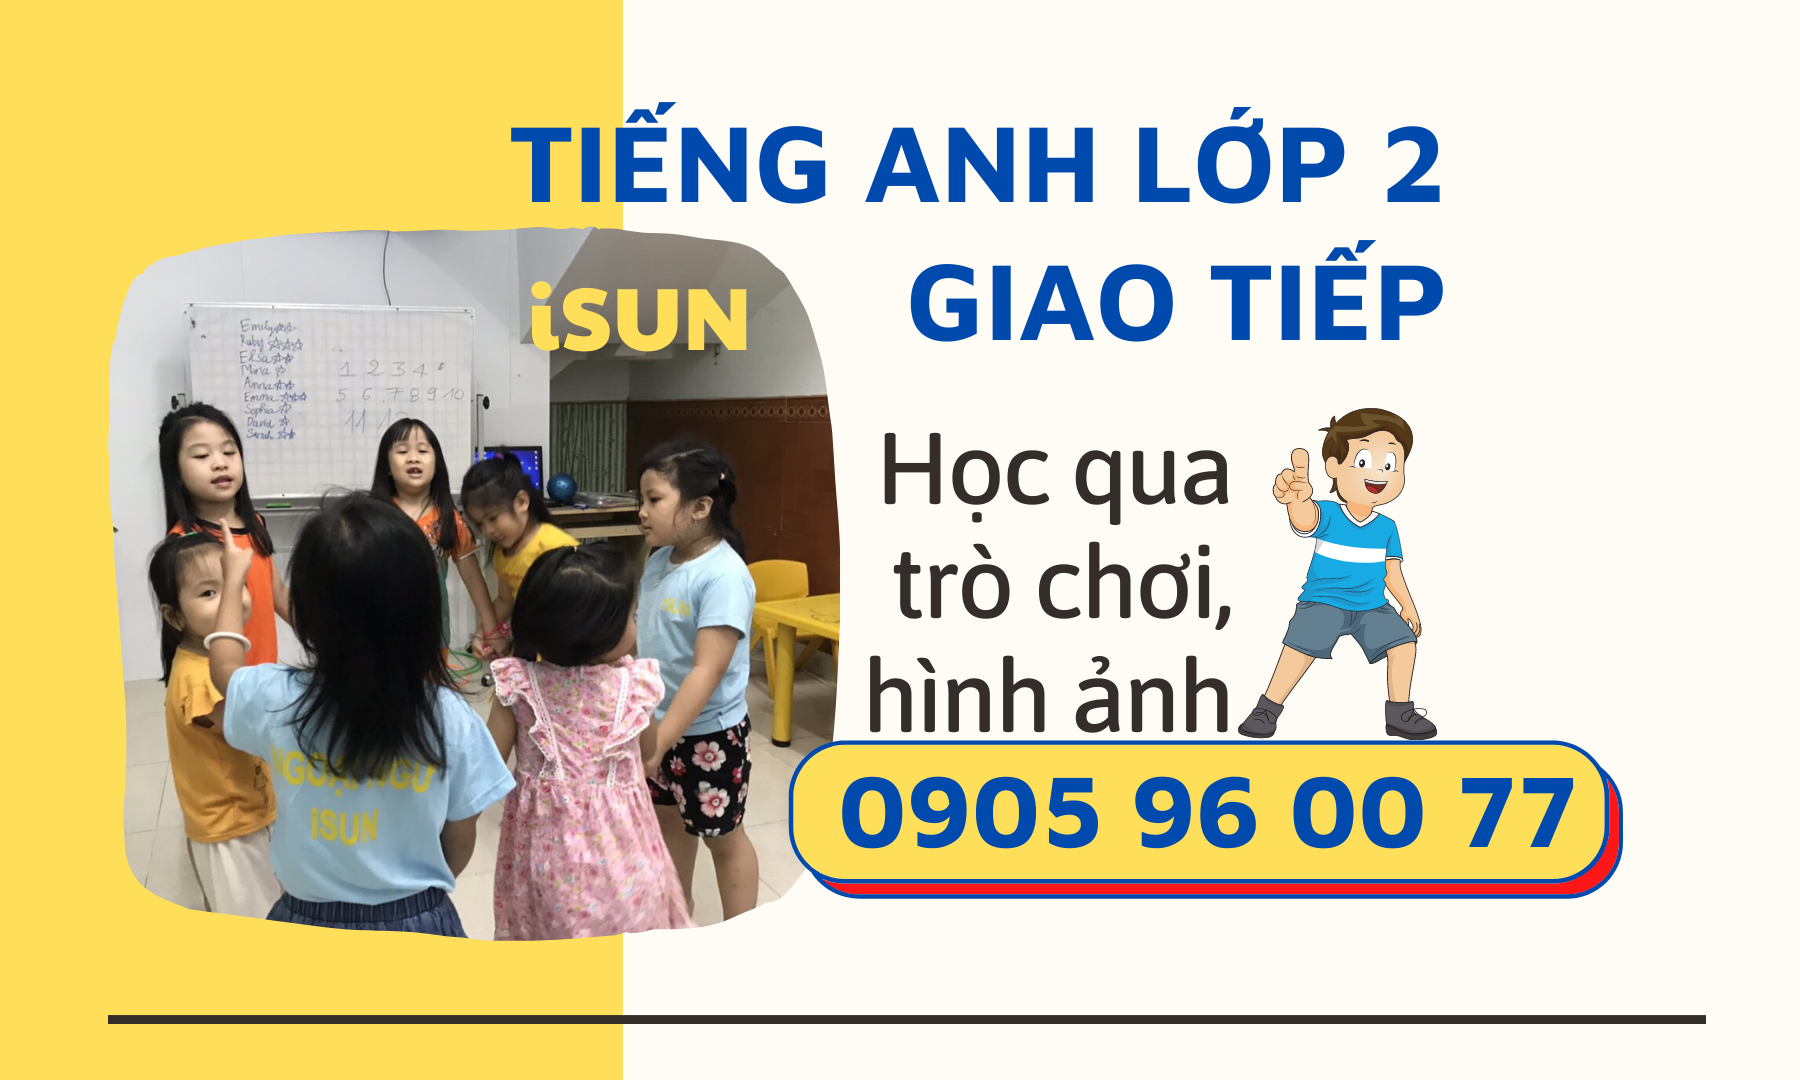 Tiếng anh giao tiếp lớp 2